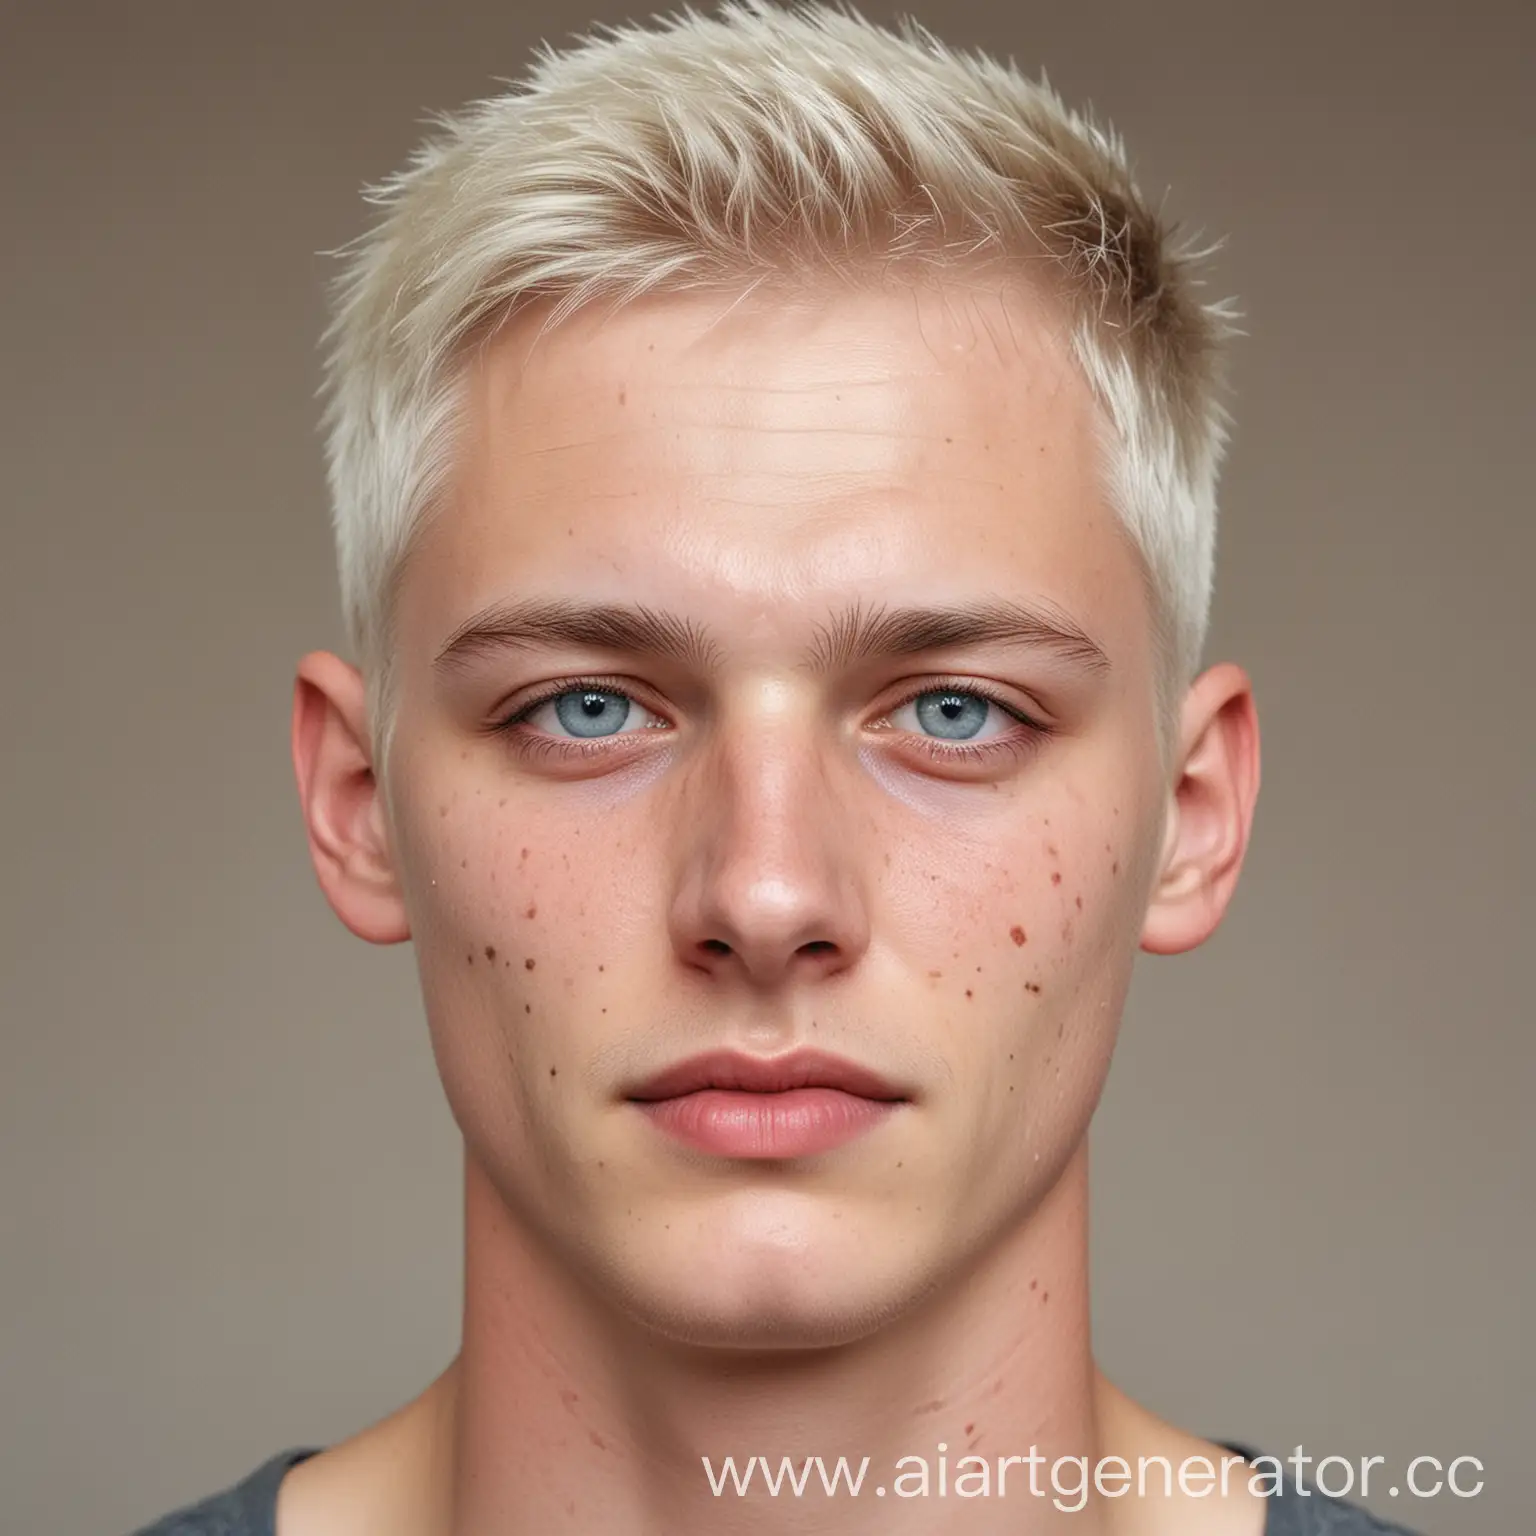 Portrait-of-a-Handsome-German-Boy-with-Bleached-Hair-and-GrayBlue-Eyes